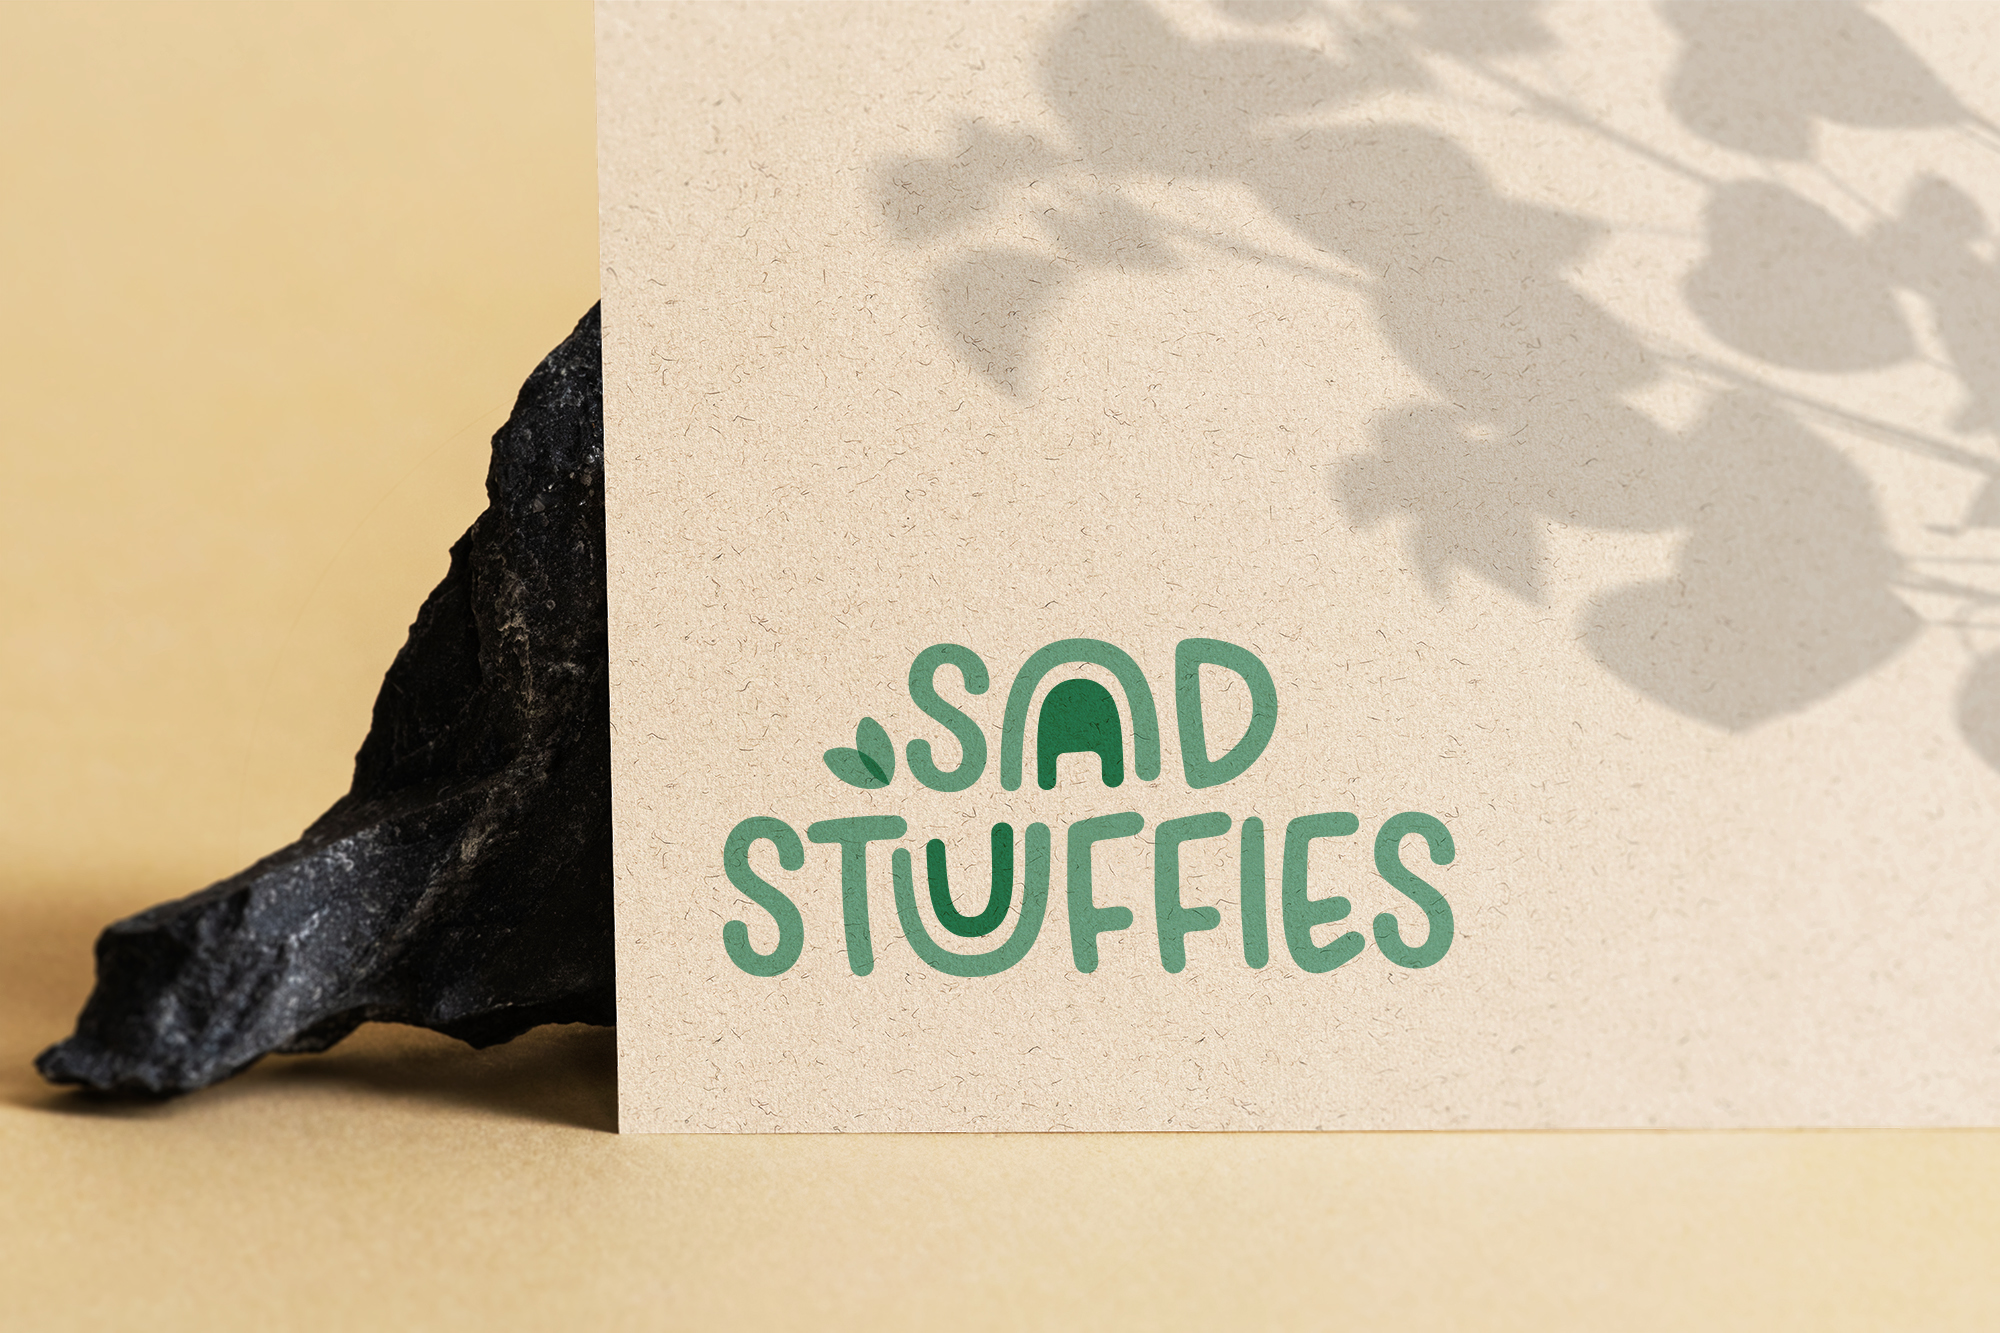 Brand identity design created for Sad Stuffies by Olive Ridley Studios - primary logo